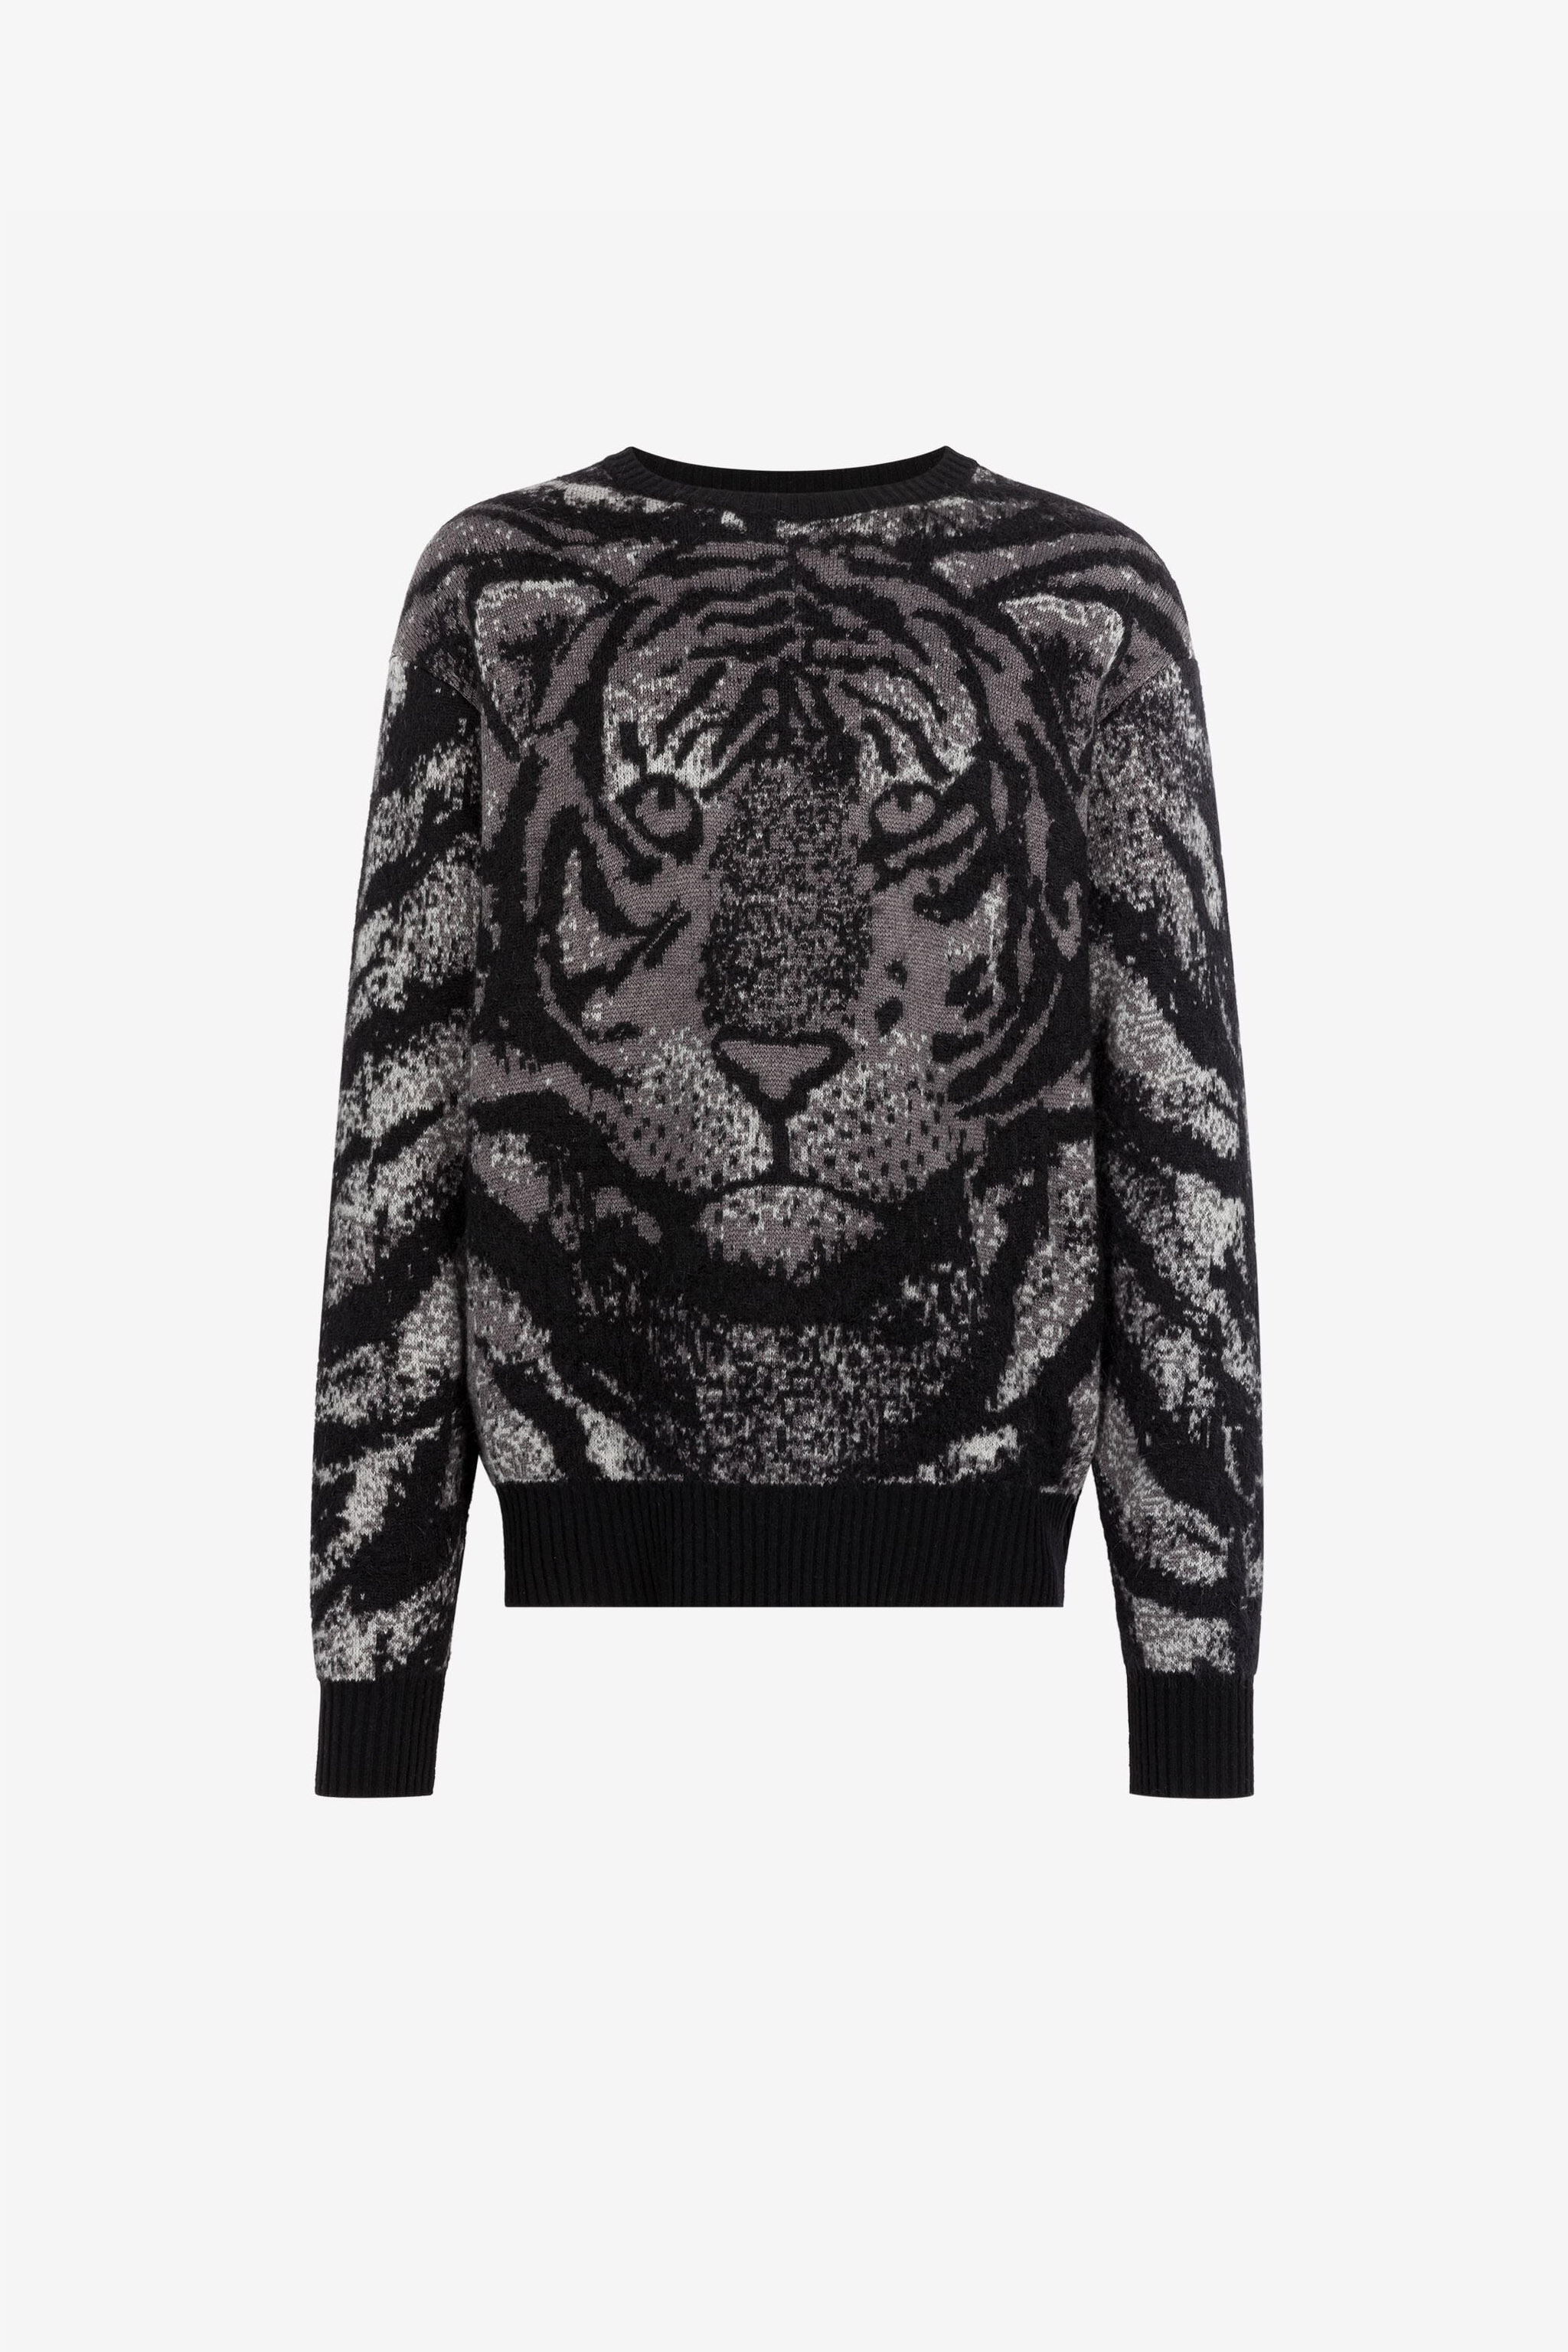 Murano Tigers of Tokyo Collection Tiger Intarsia Sweater